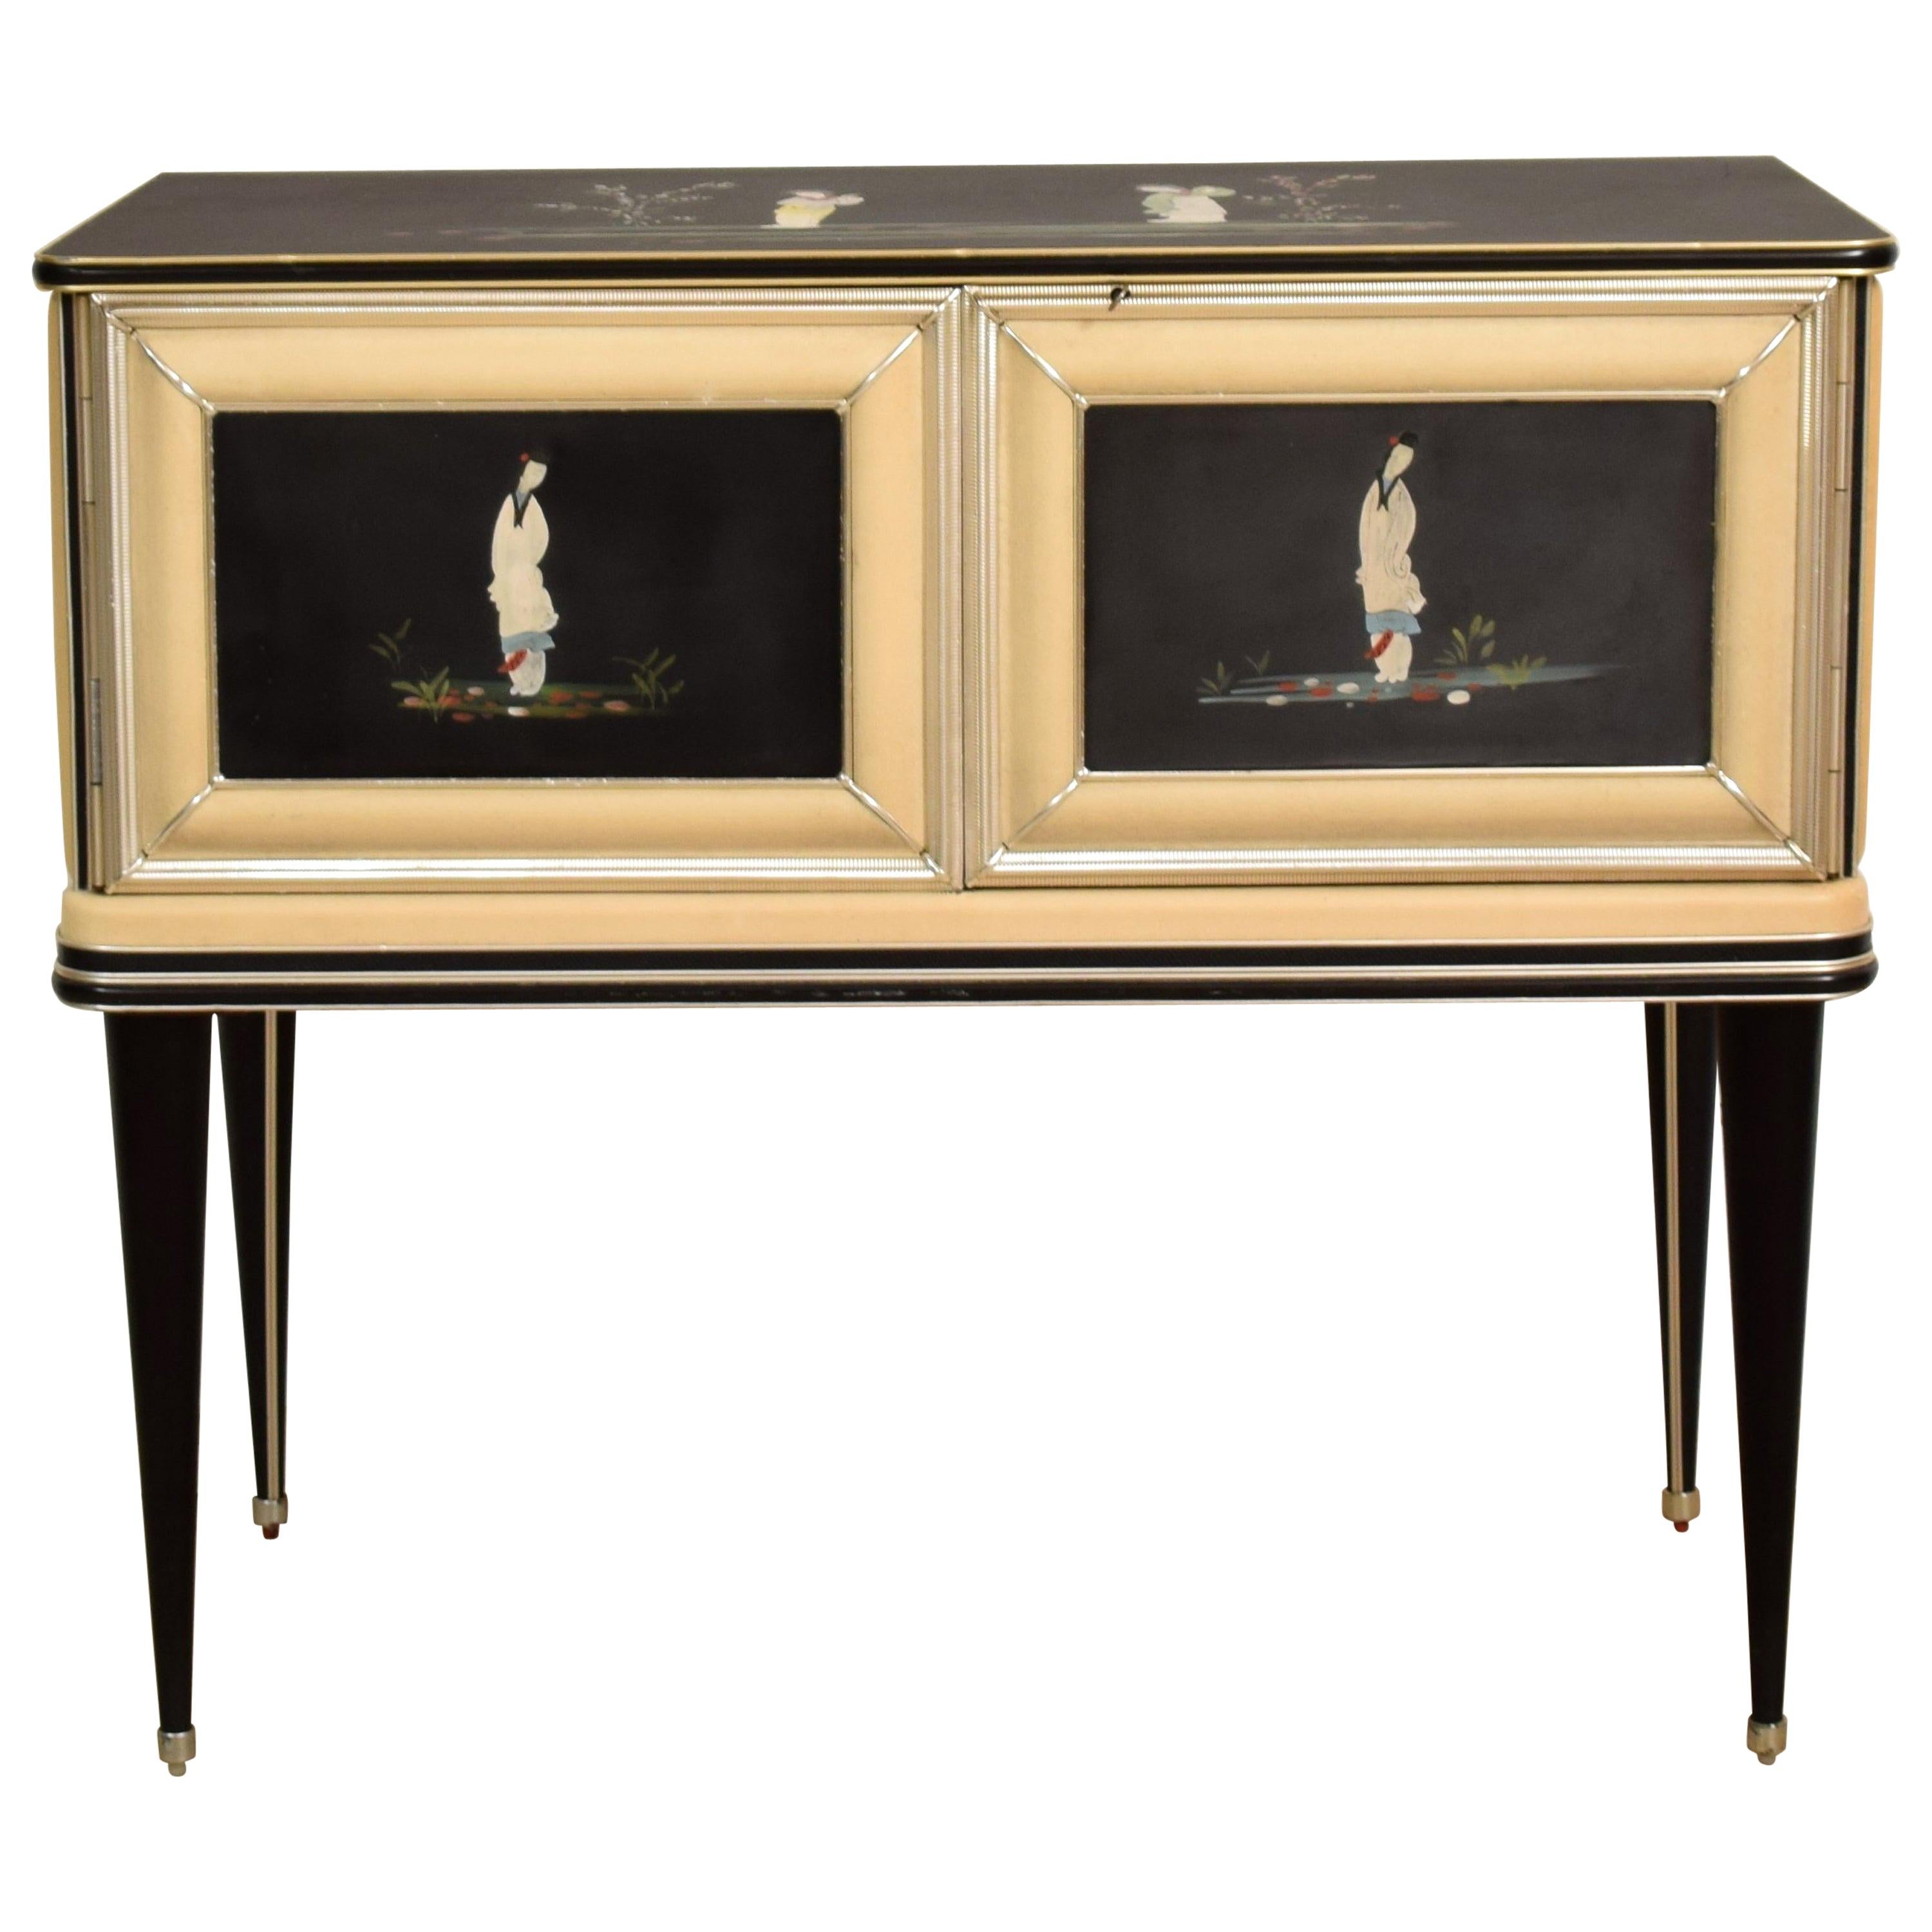 Midcentury Italian Chinoiserie Sideboard by Umberto Mascagni for Harrods, 1950s